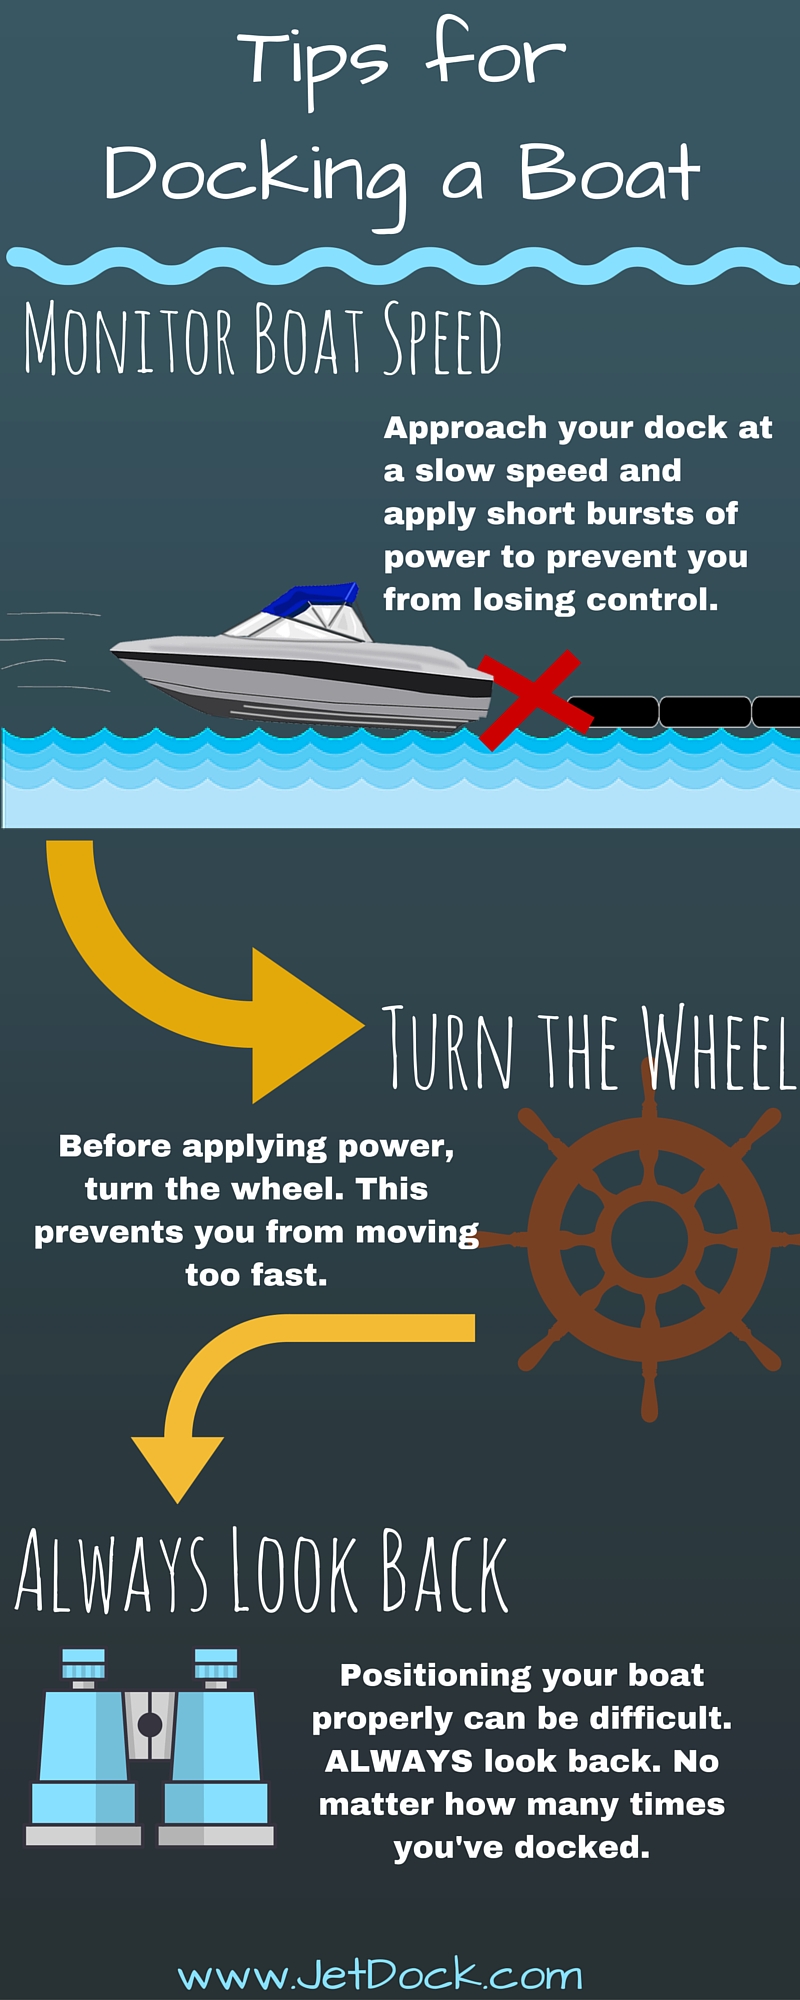 Tips on how to dock a boat from JetDock.com